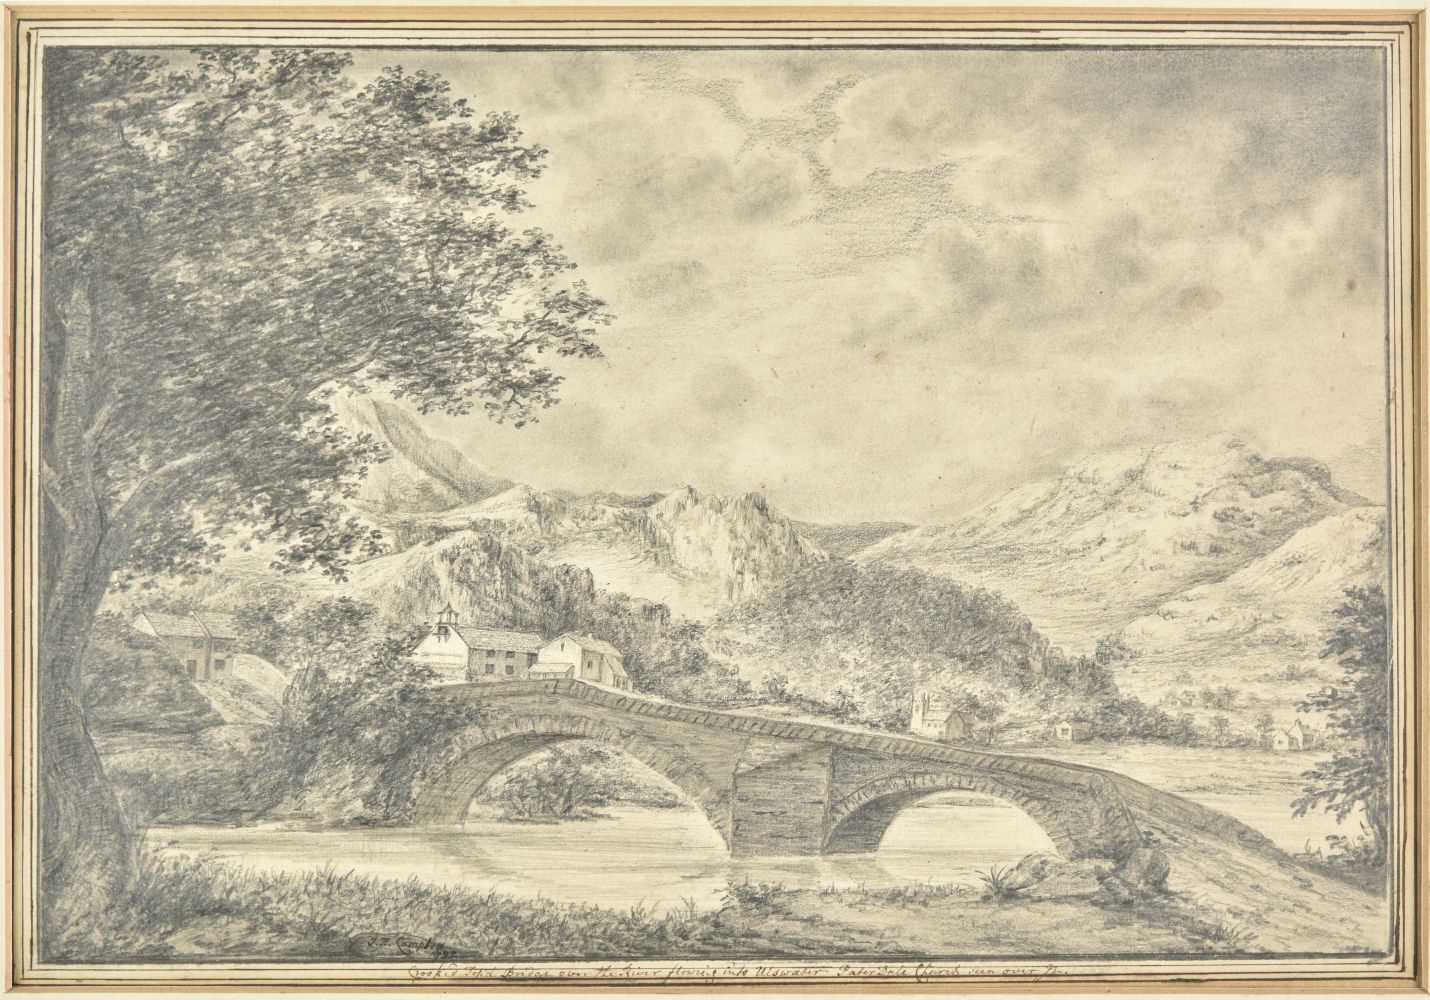 Lot 291 - Campbell (John Henry, 1757-1828). Crooked Top'd Bridge over the River flowing into Ulswater, 1792